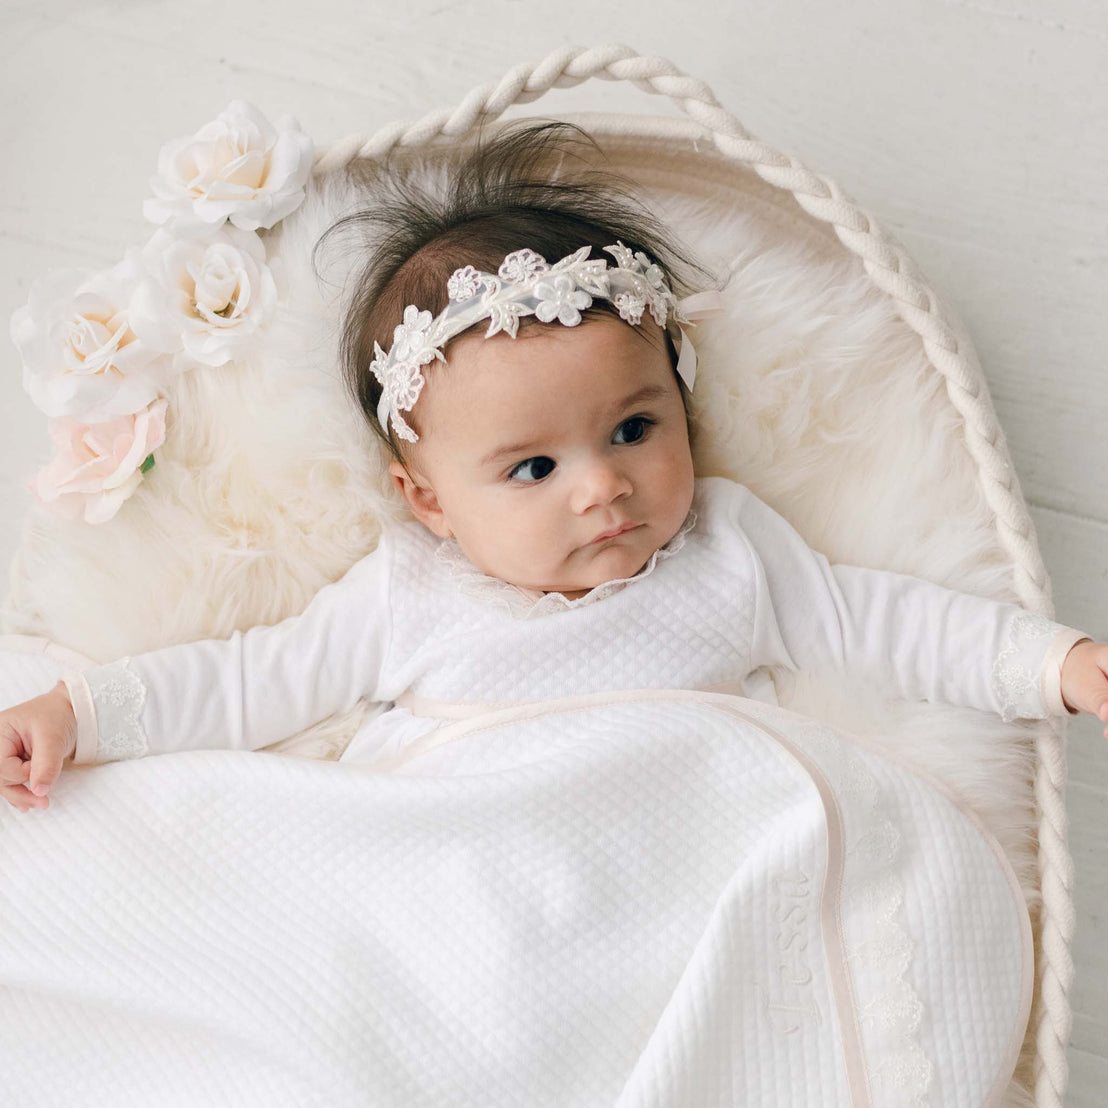 Newborn baby girl wearing the Tessa Flower Headband. The headband is accented with beautiful pink and white floral appliqué and a pink silk ribbon bow.